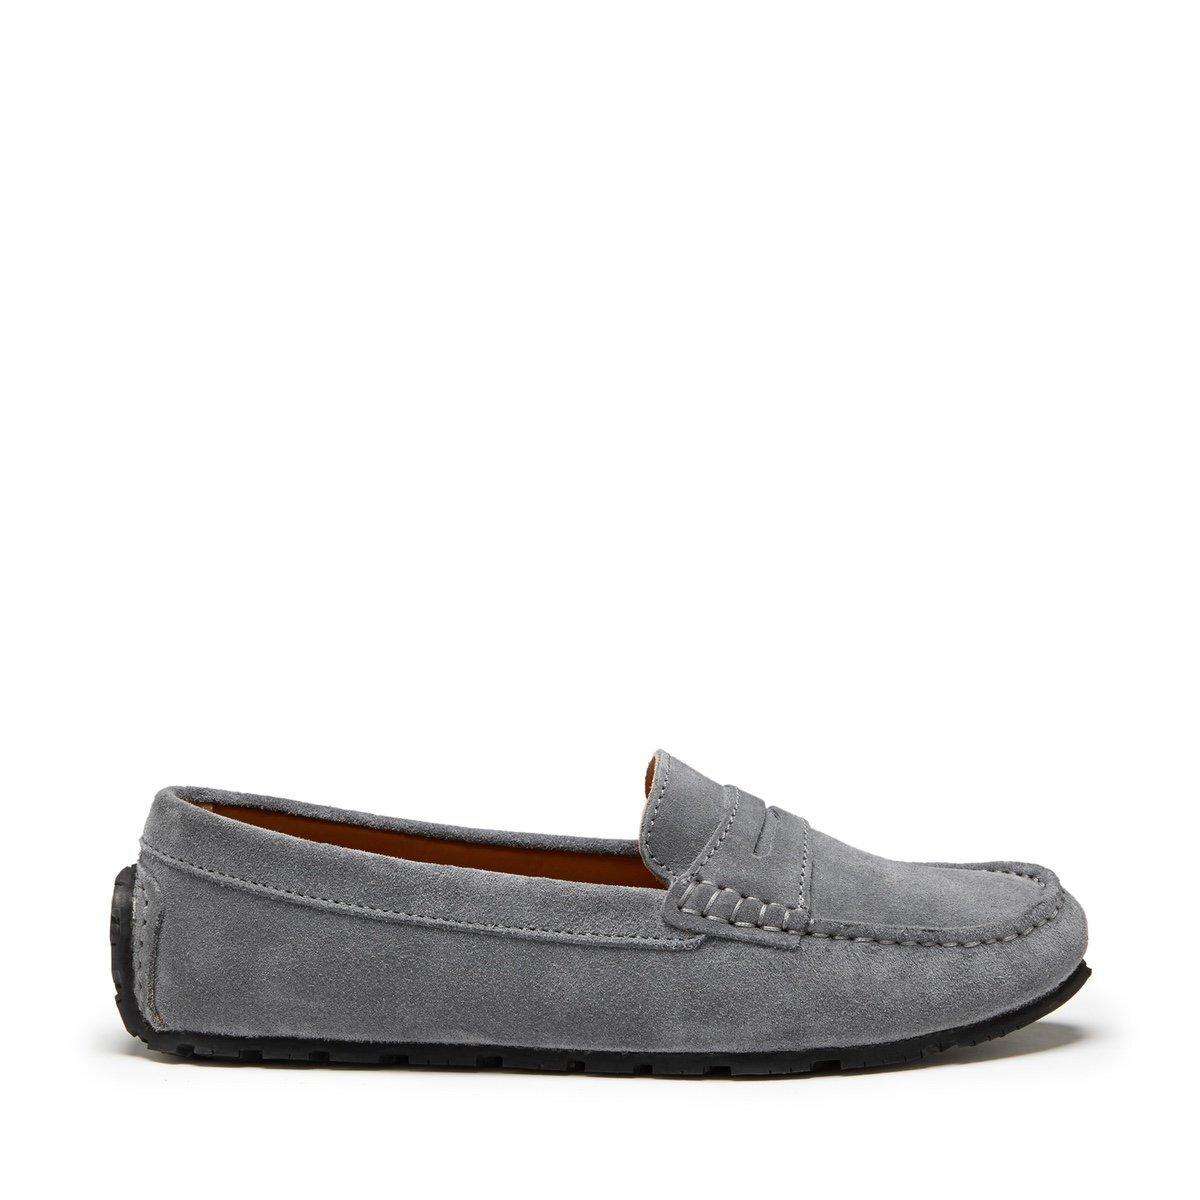 grey suede penny loafers